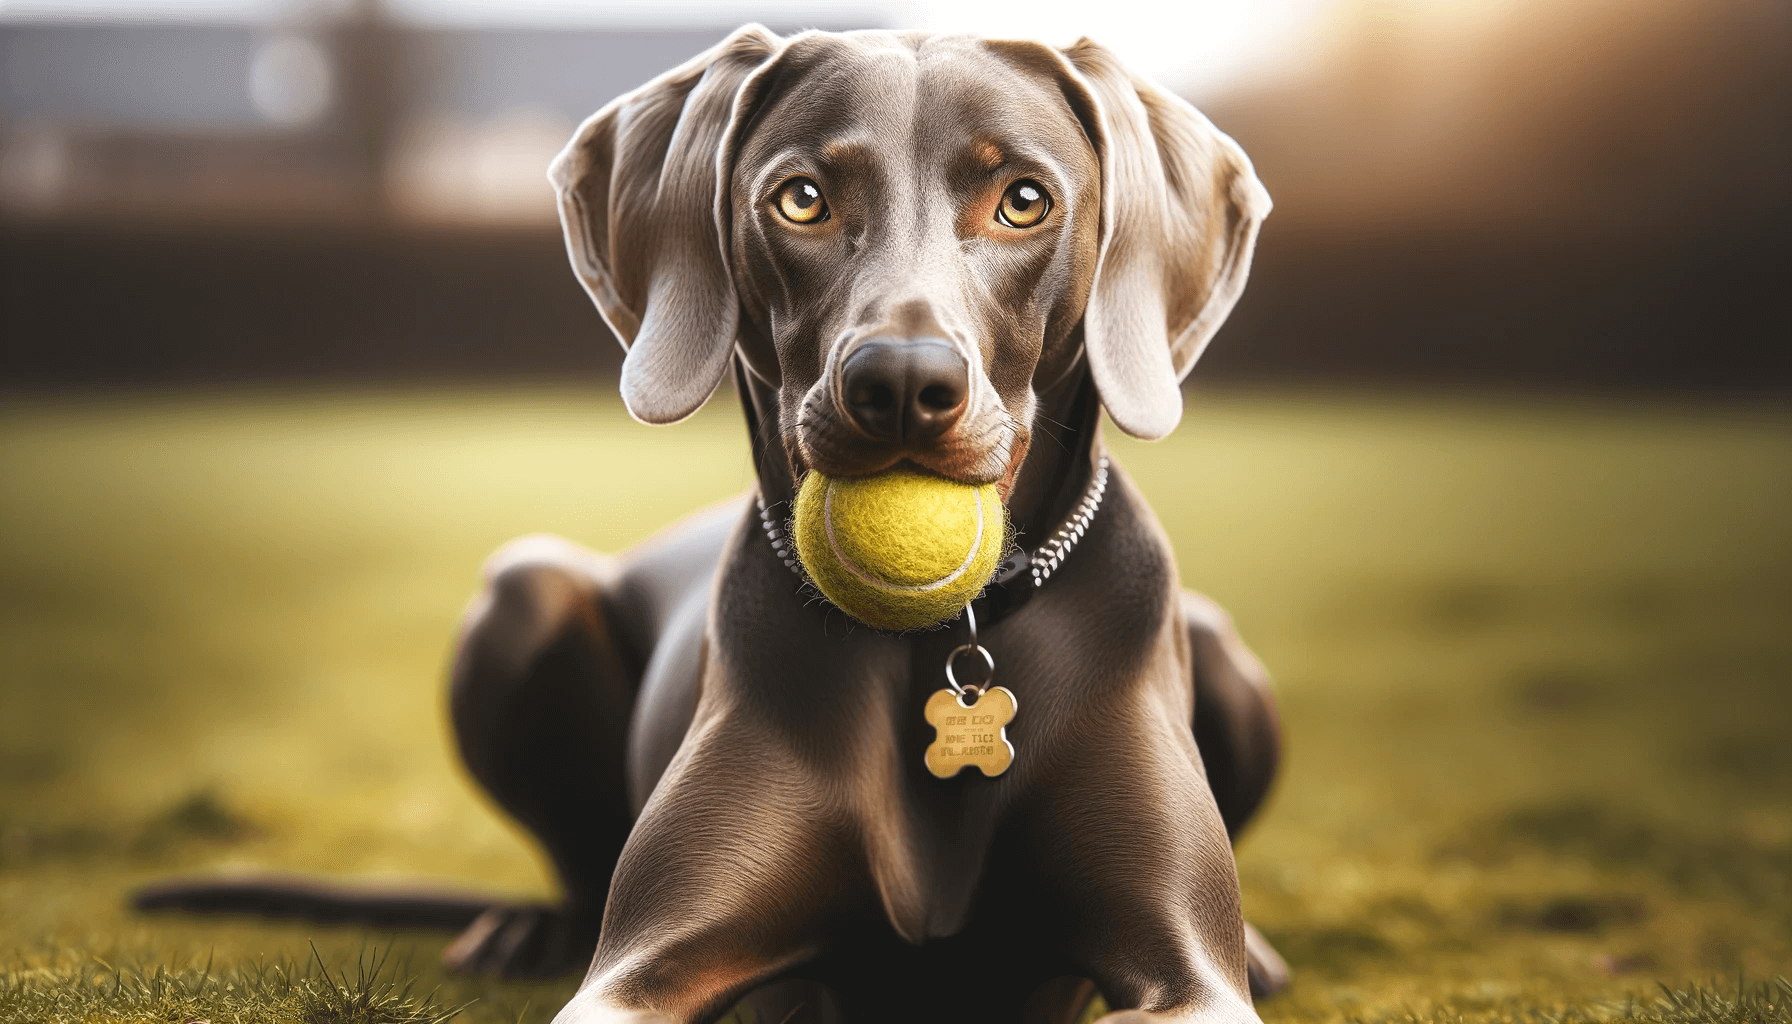 Weimaraner Lab mix dog lying on a grassy field, holding a bright yellow tennis ball in its mouth. The dog has a sleek black coat and a bright attentive expression.